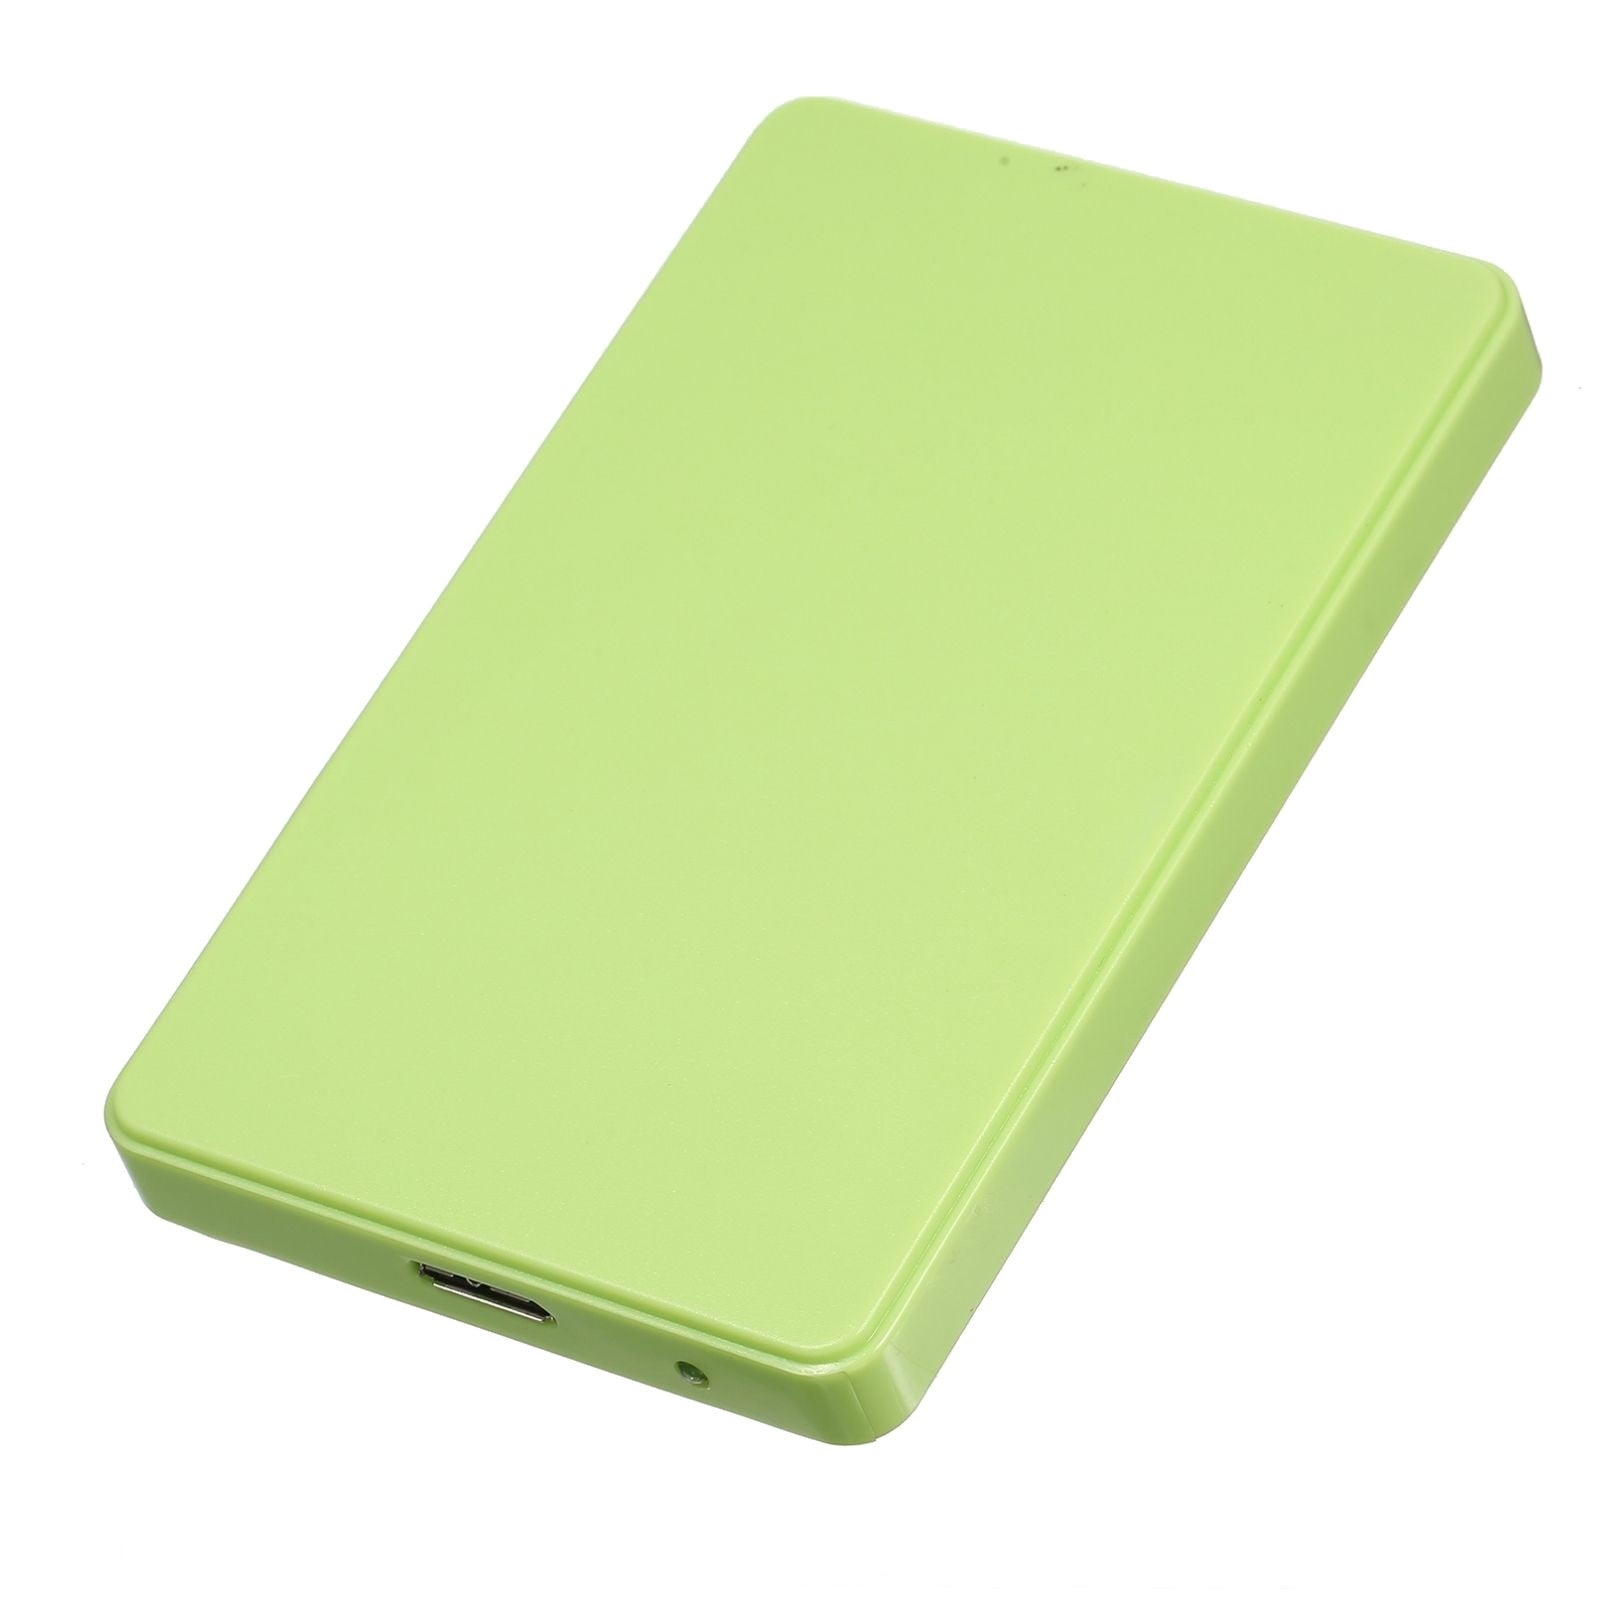 2.5 inch Hard Disk Case USB3.0 High-speed 5Gpbs Transmission External Enclosure SATA Hard Drive Case Support 2.5inch 7/9.5mm SATA HDD/SSD - Green